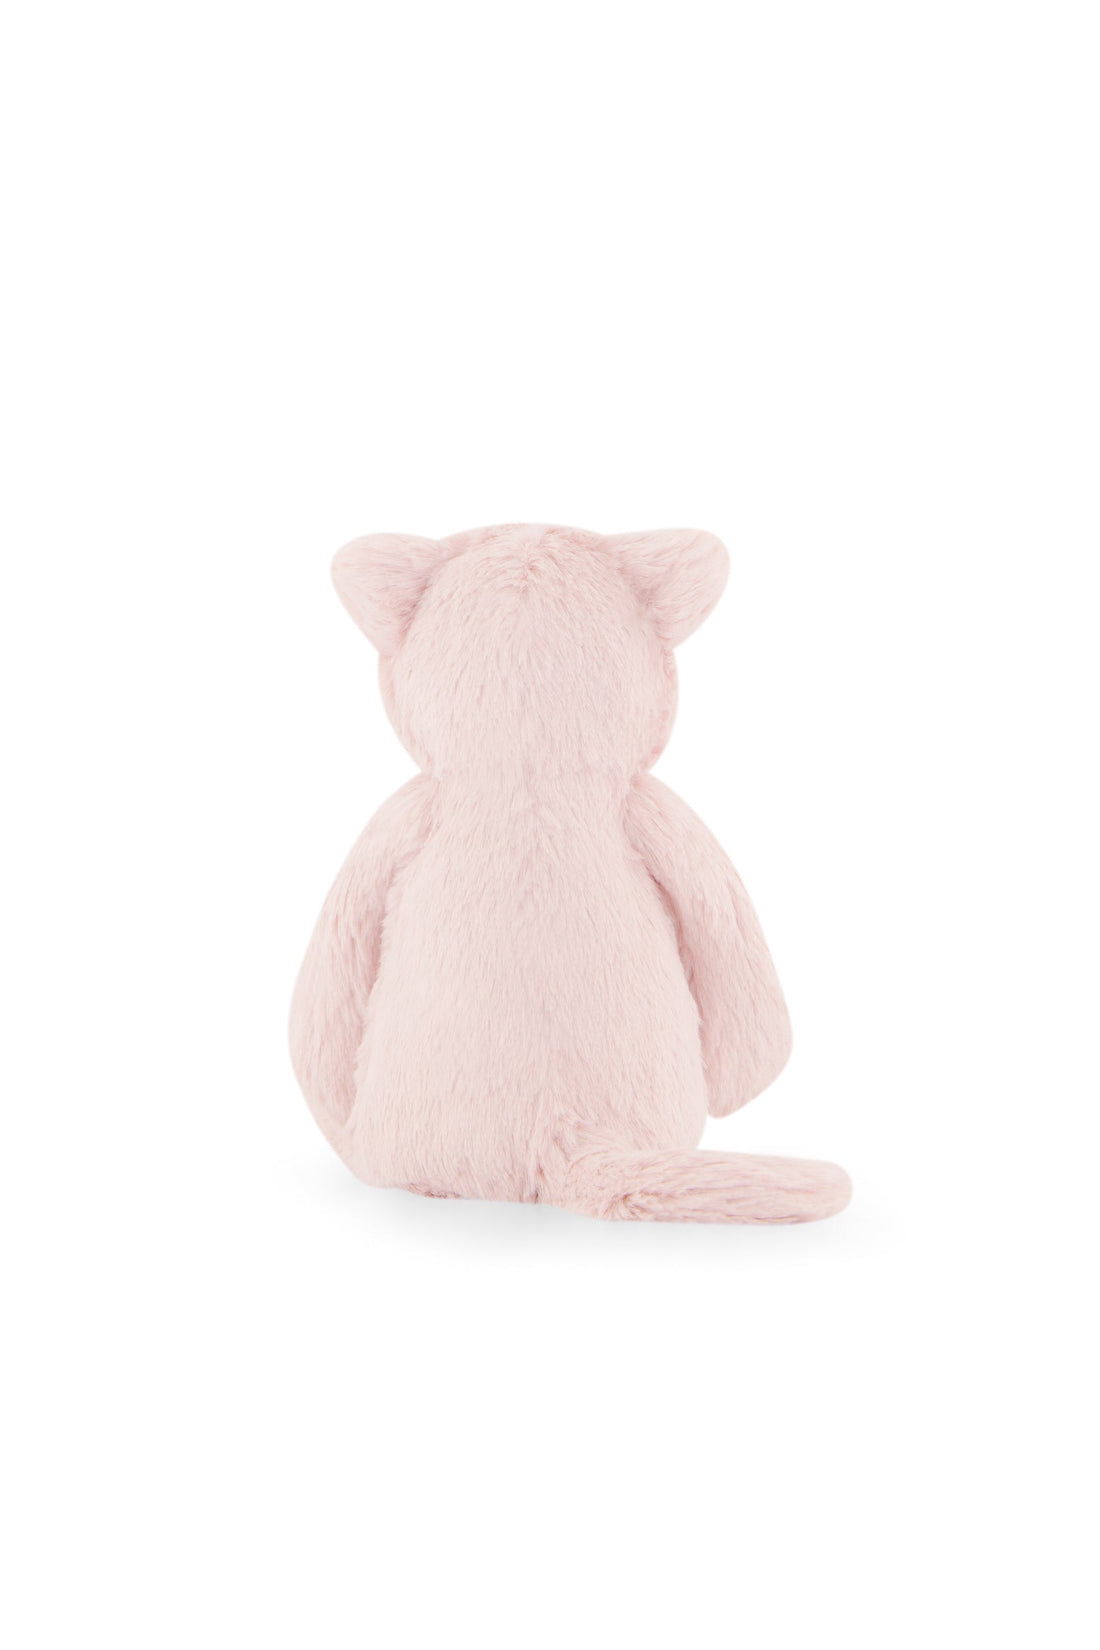 Snuggle Bunnies - Elsie the Kitty - Blush Childrens Toy from Jamie Kay NZ